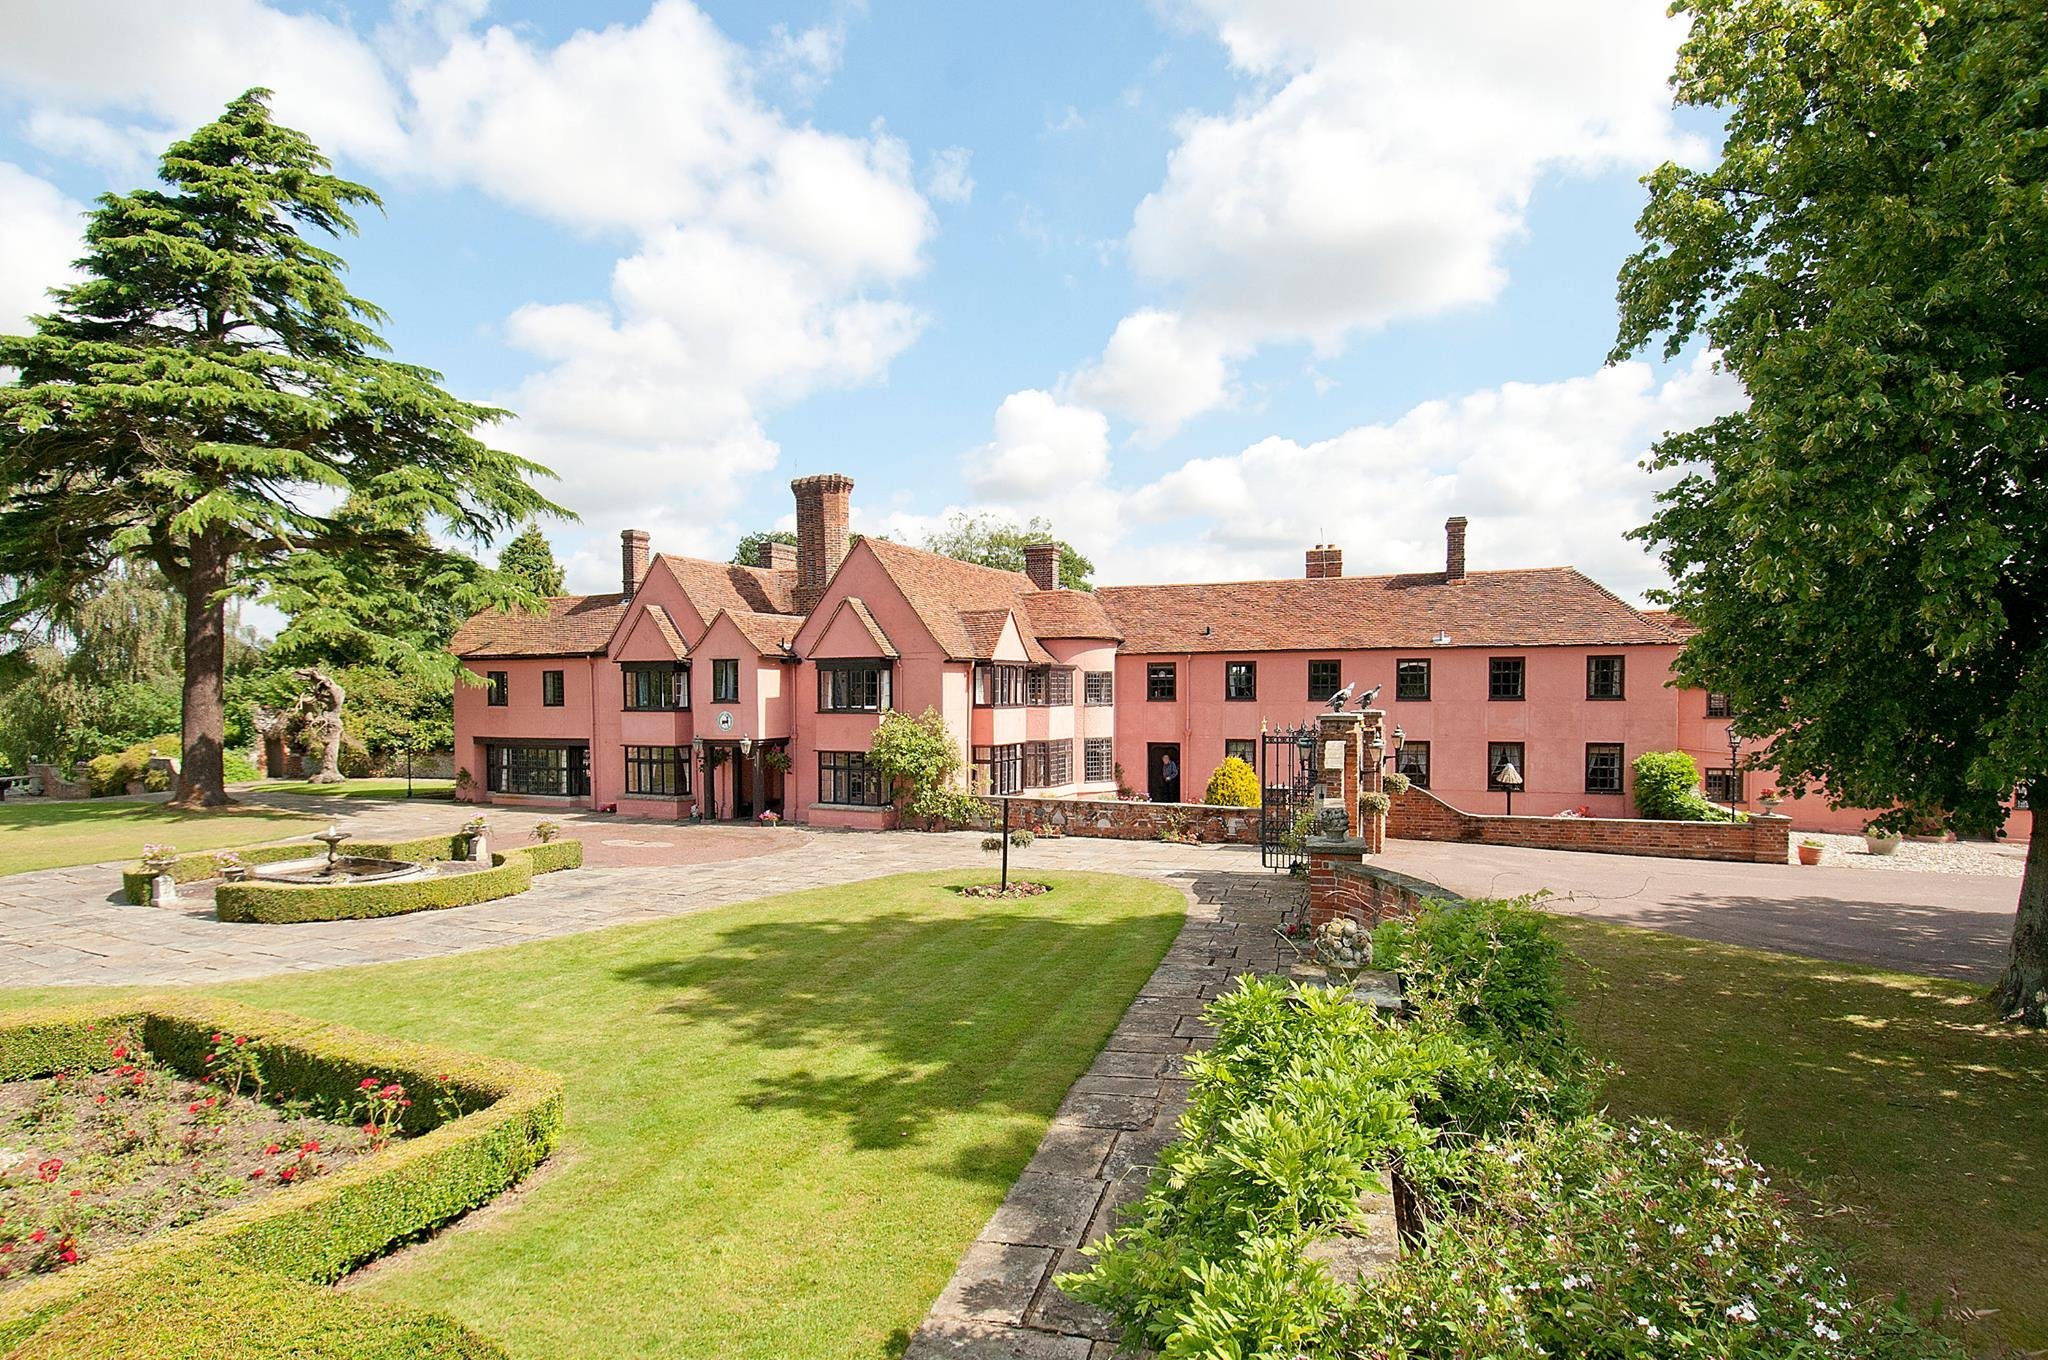 Described as “The Jewel of Essex” Steeped in history and romance Little Easton Manor, offers a unique opportunity to choose the wedding you really deserve.